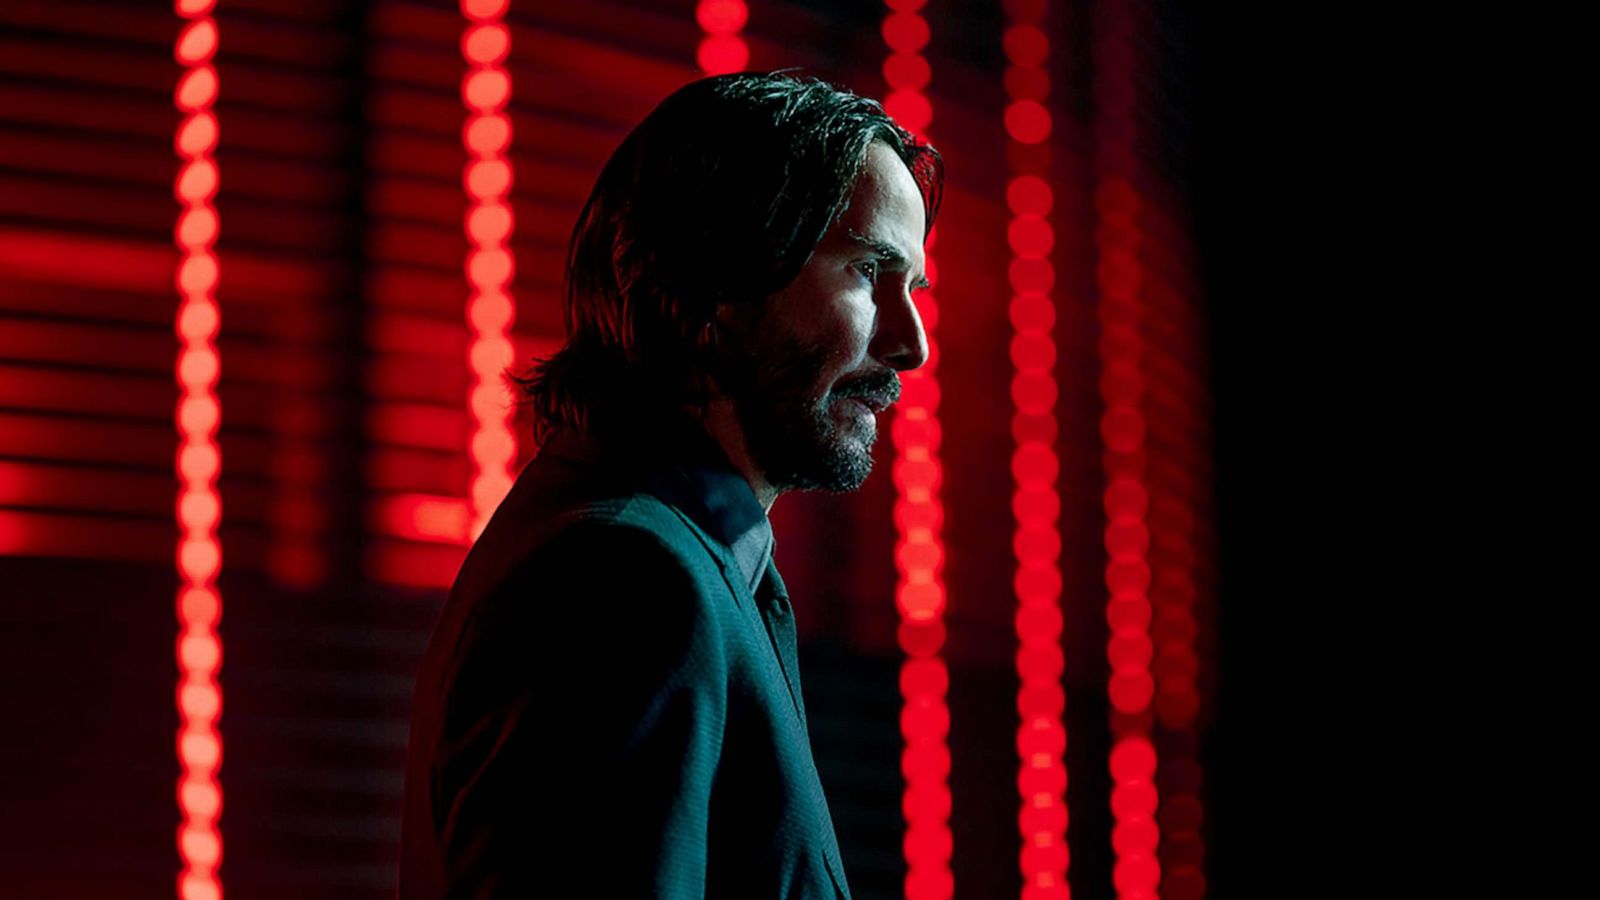 REVIEW: 'John Wick: Chapter 4' raises the bar on stunts, action ...